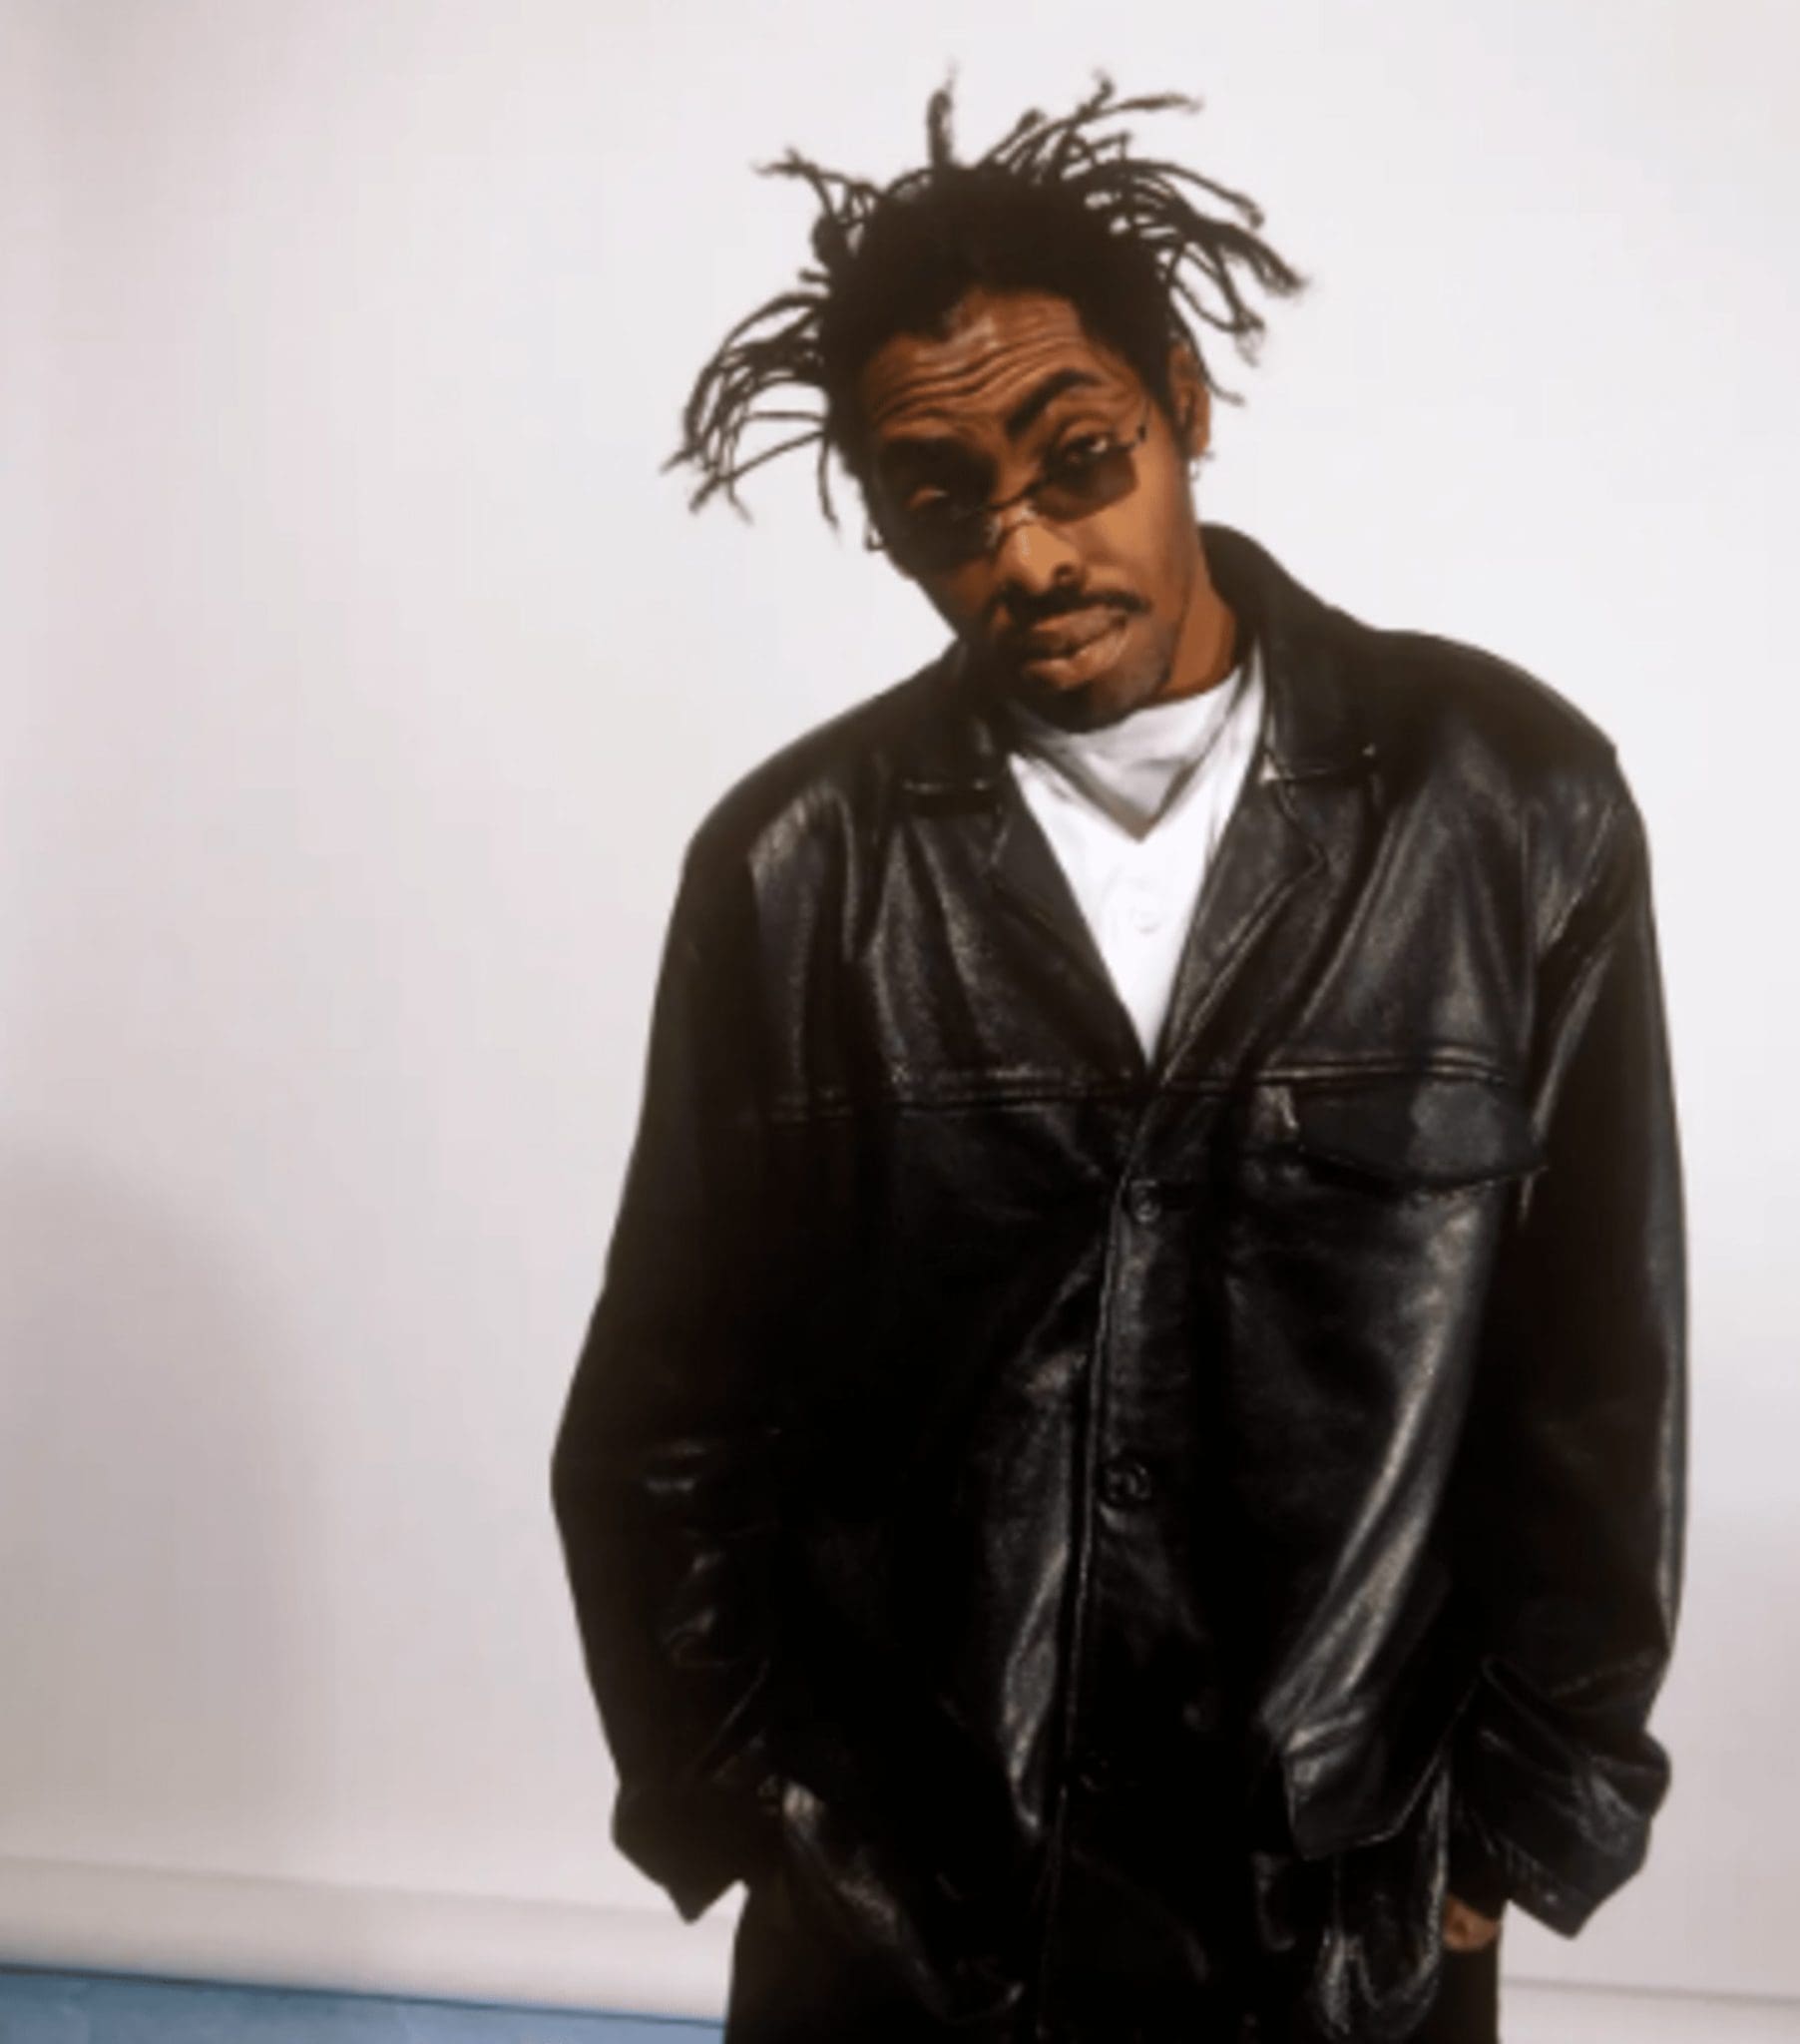 Coolio may have ded from his acute asthma1